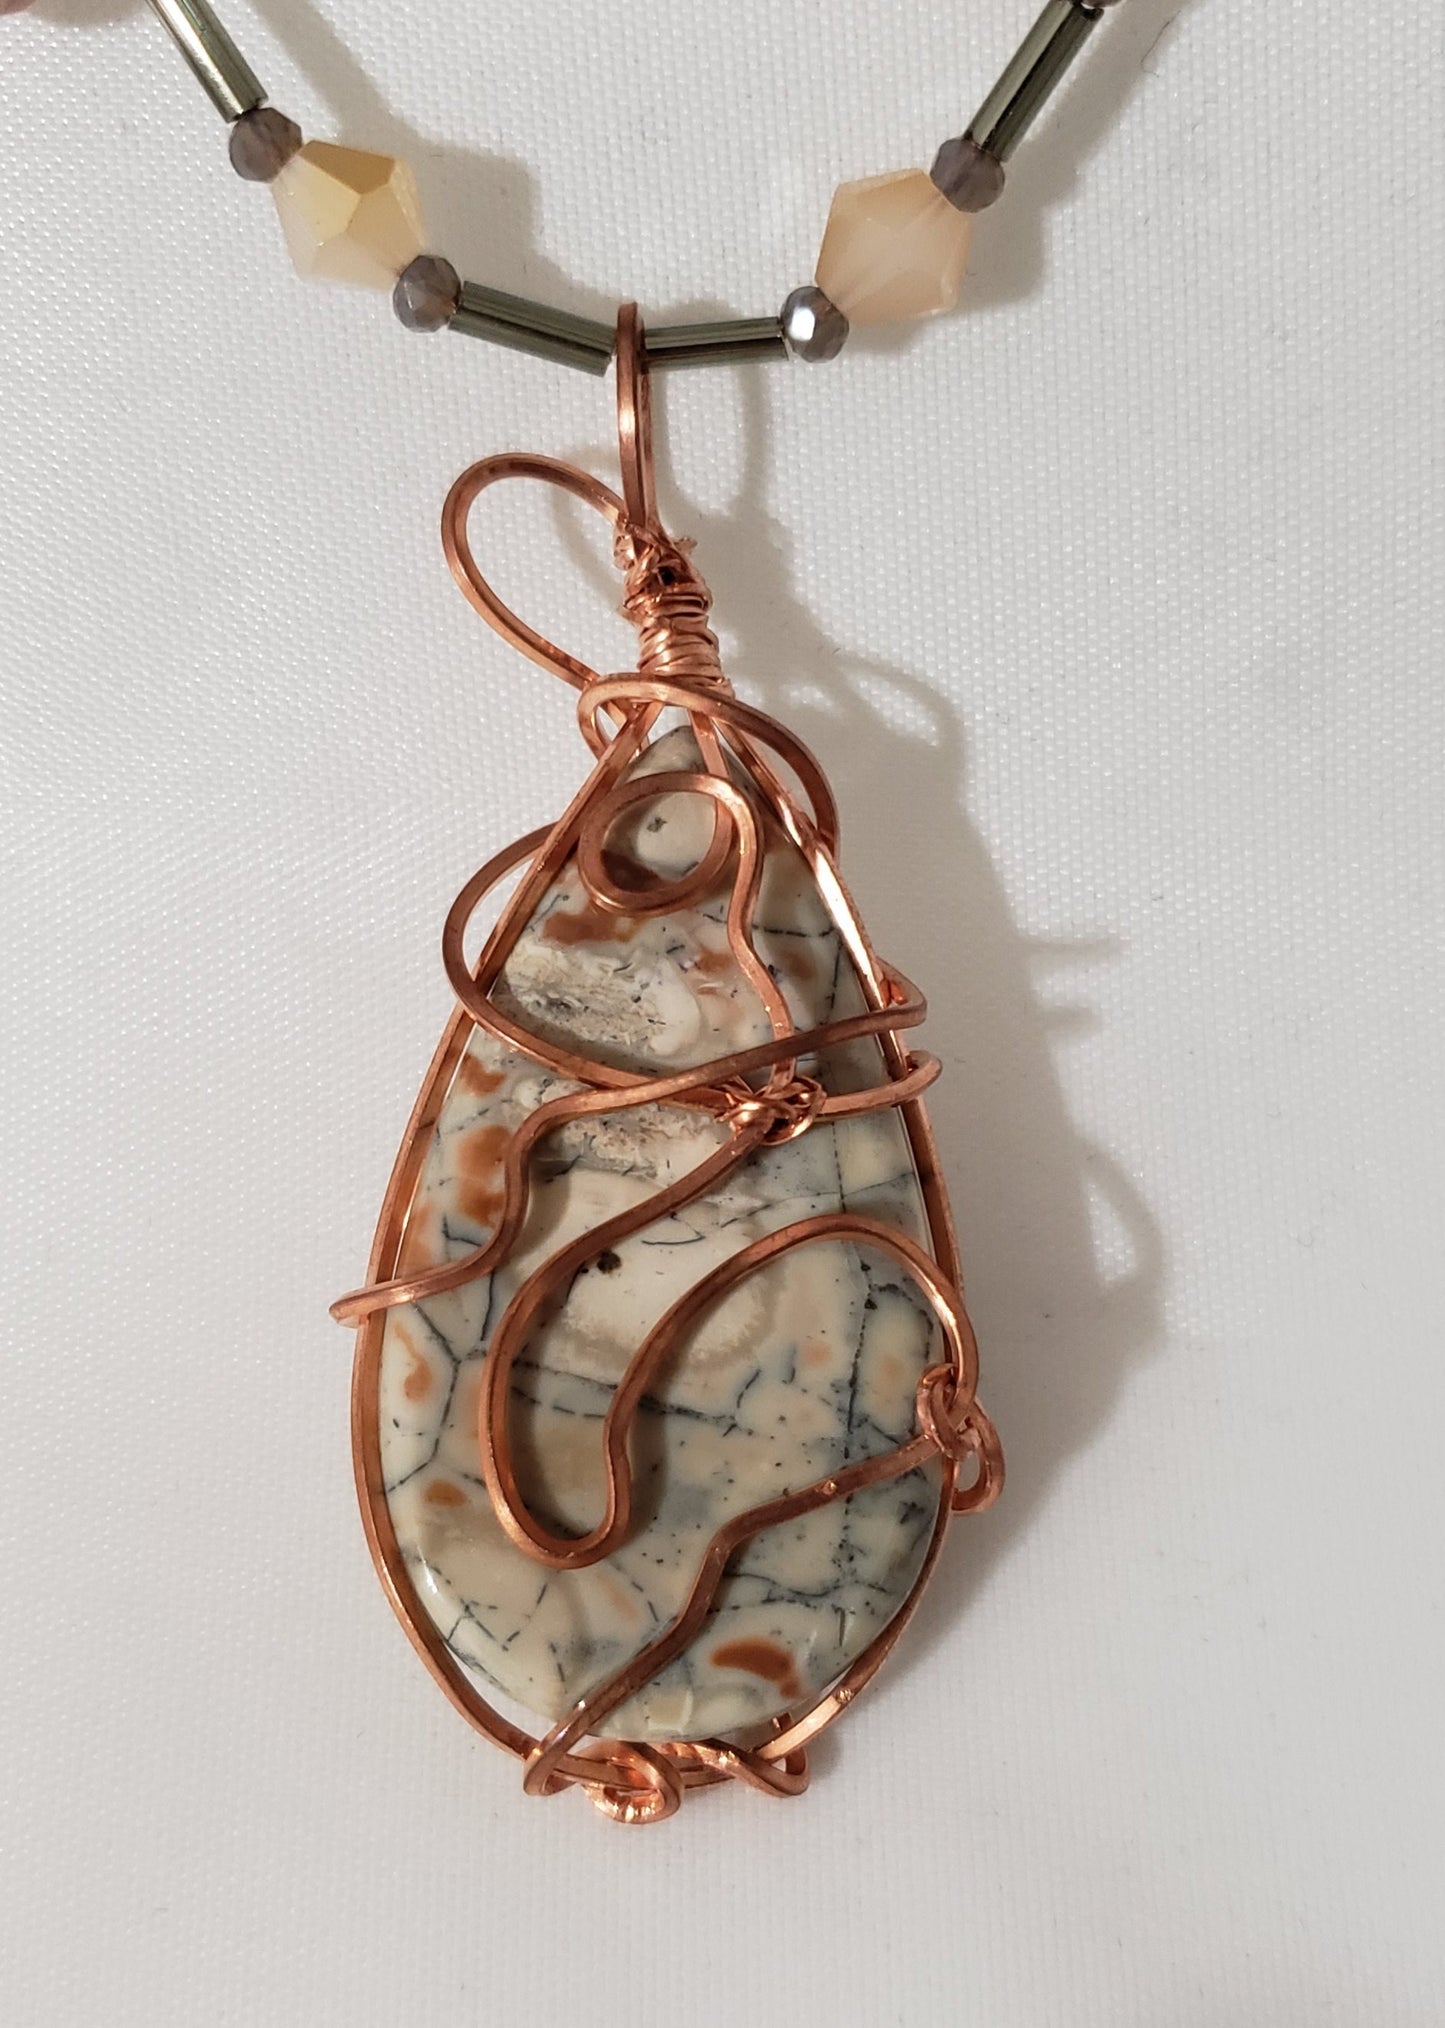 Fire Agate Necklace with Rose Gold Tone Wire Wrapped Natural Gemstone Pendant